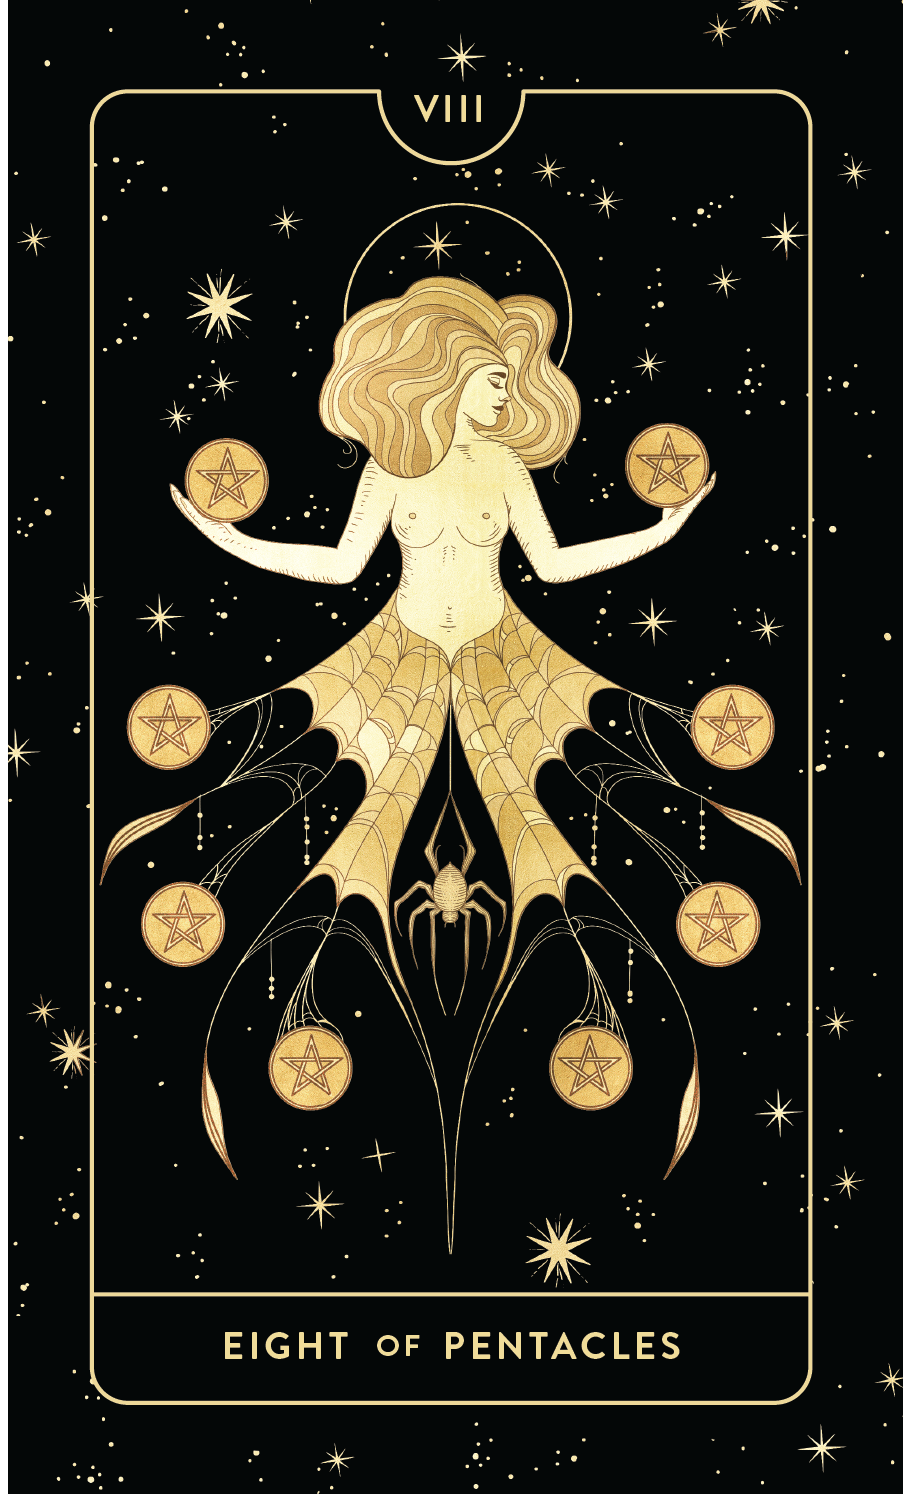 EIGHT OF PENTACLES